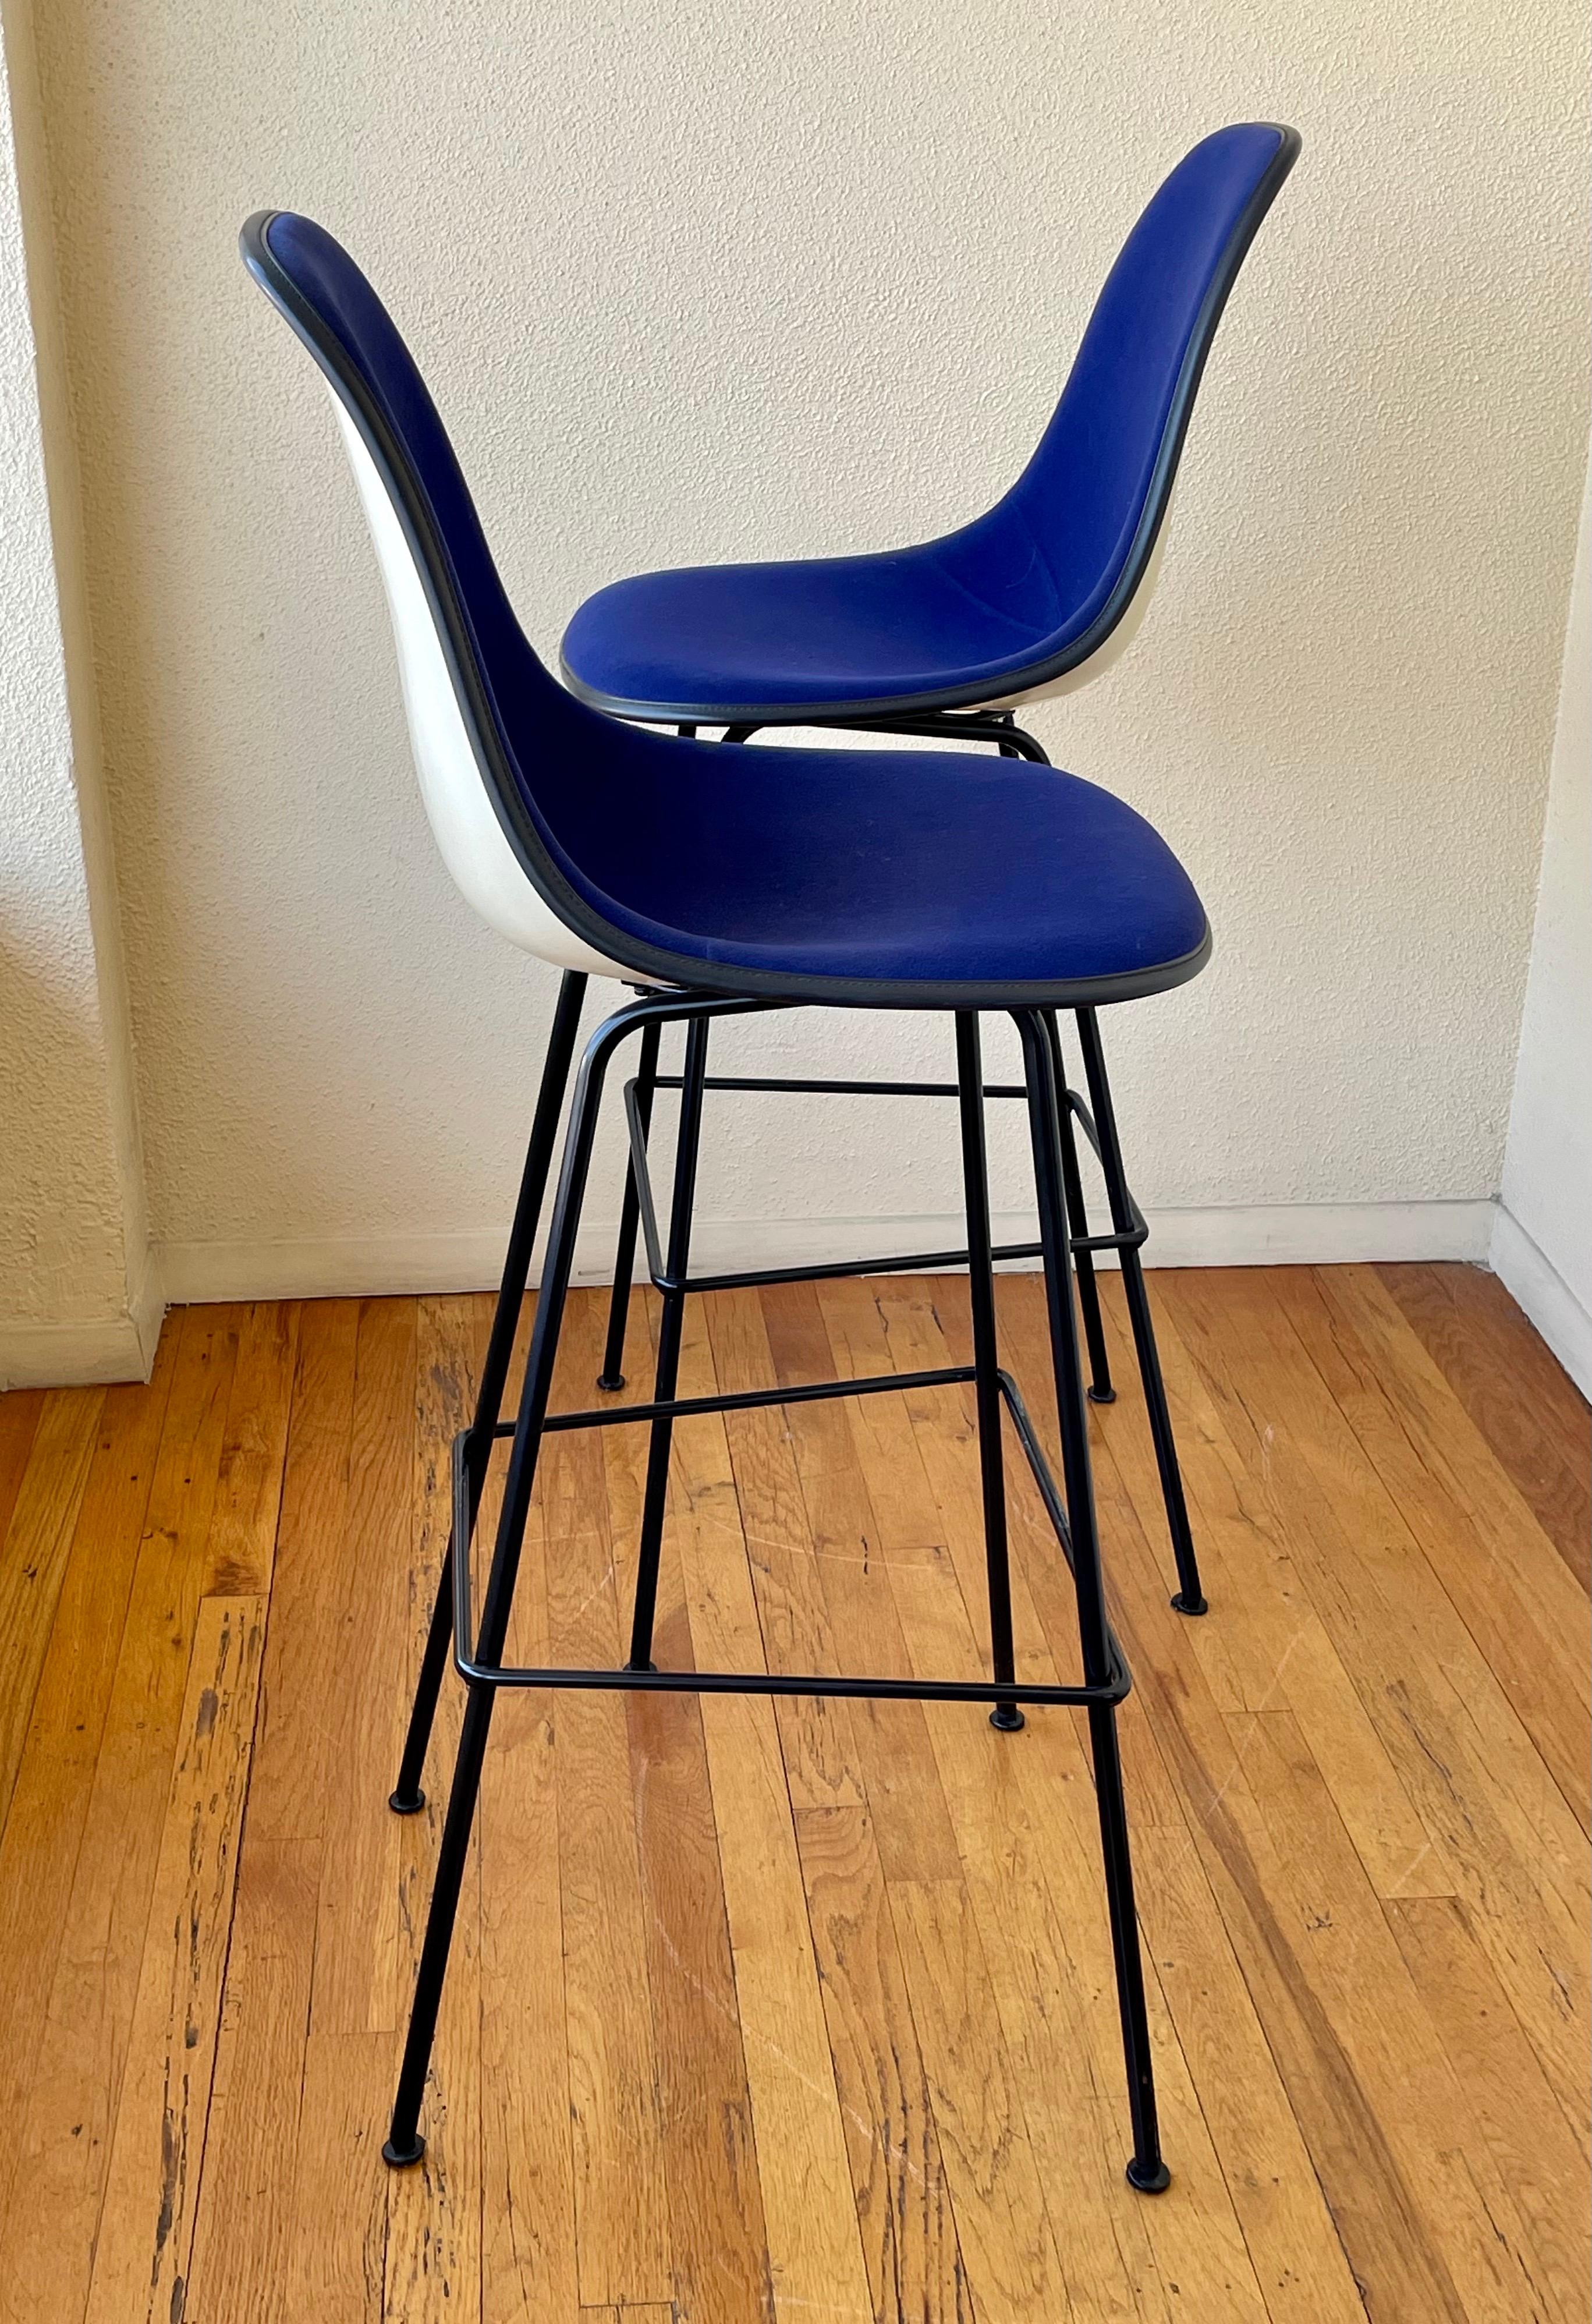 Nice pair of rare barstools designed by Charles Eames for Herman Miller circa 1970s, the navy blue velvet seat cover shows light wear and light stains as shown on the pics but has nice foam overall. The fiberglass shells are in good condition. with